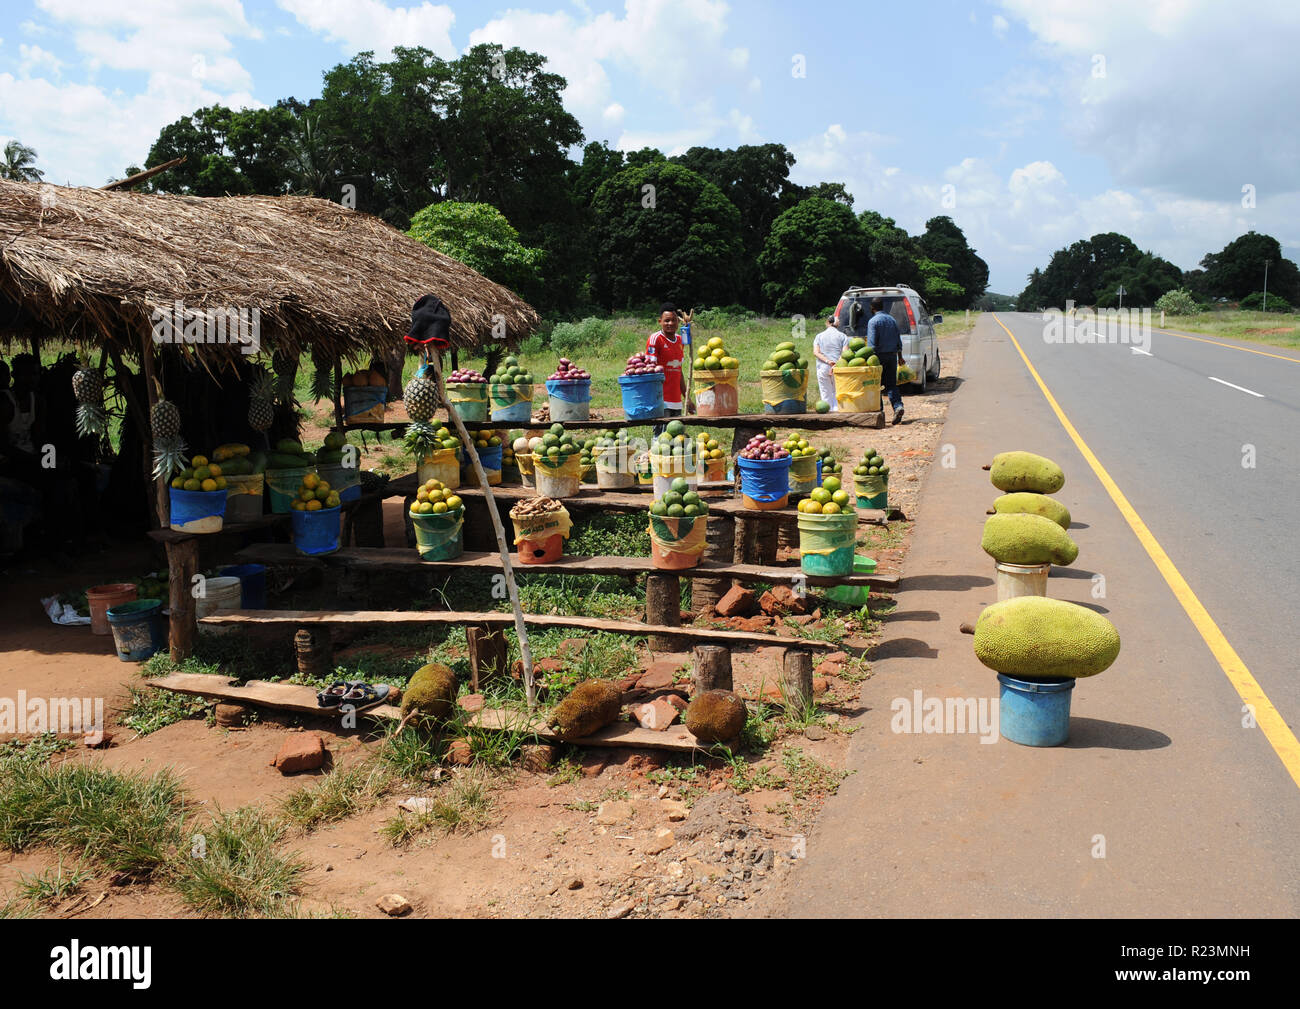 Tanzania Highway A14-B1 part of Great North Road resurfaced by Chinese labor, Roadside fruit stall selling assorted locally grown fresh tasty fruits. Stock Photo